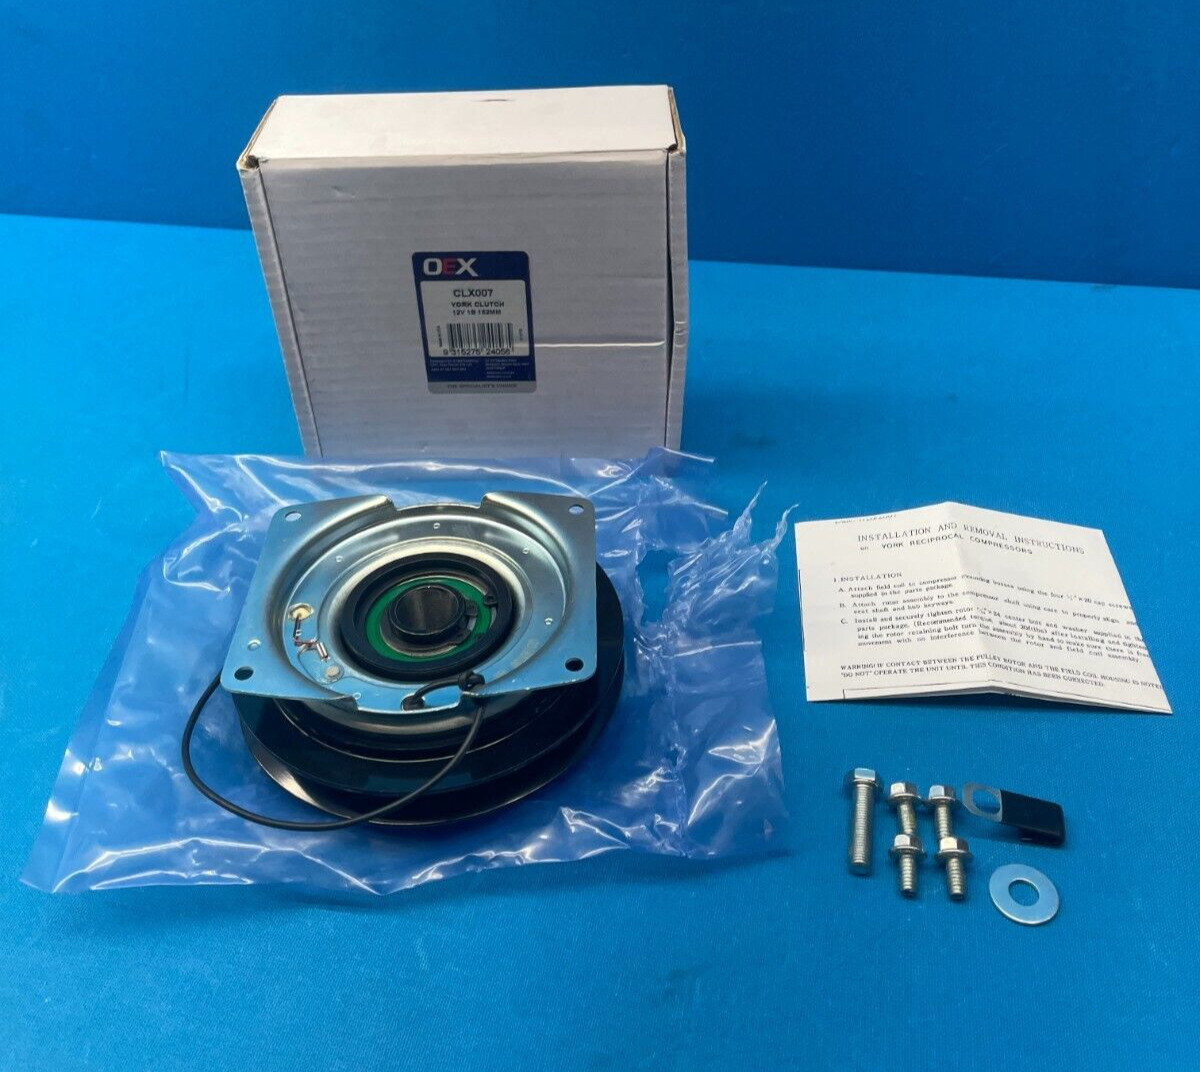 OEX York Section To Suit York Compressor Clutch Assembly CLX007 12volt 1B 152mm